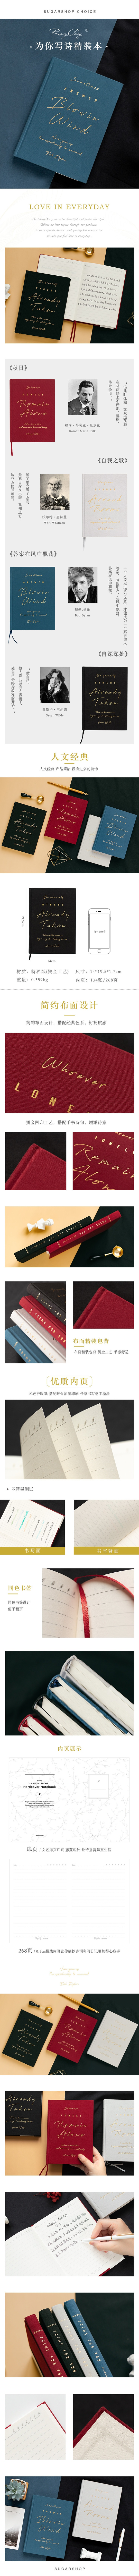 Write a hand-book of poems and cloth for you《Answers in the Wind》400g